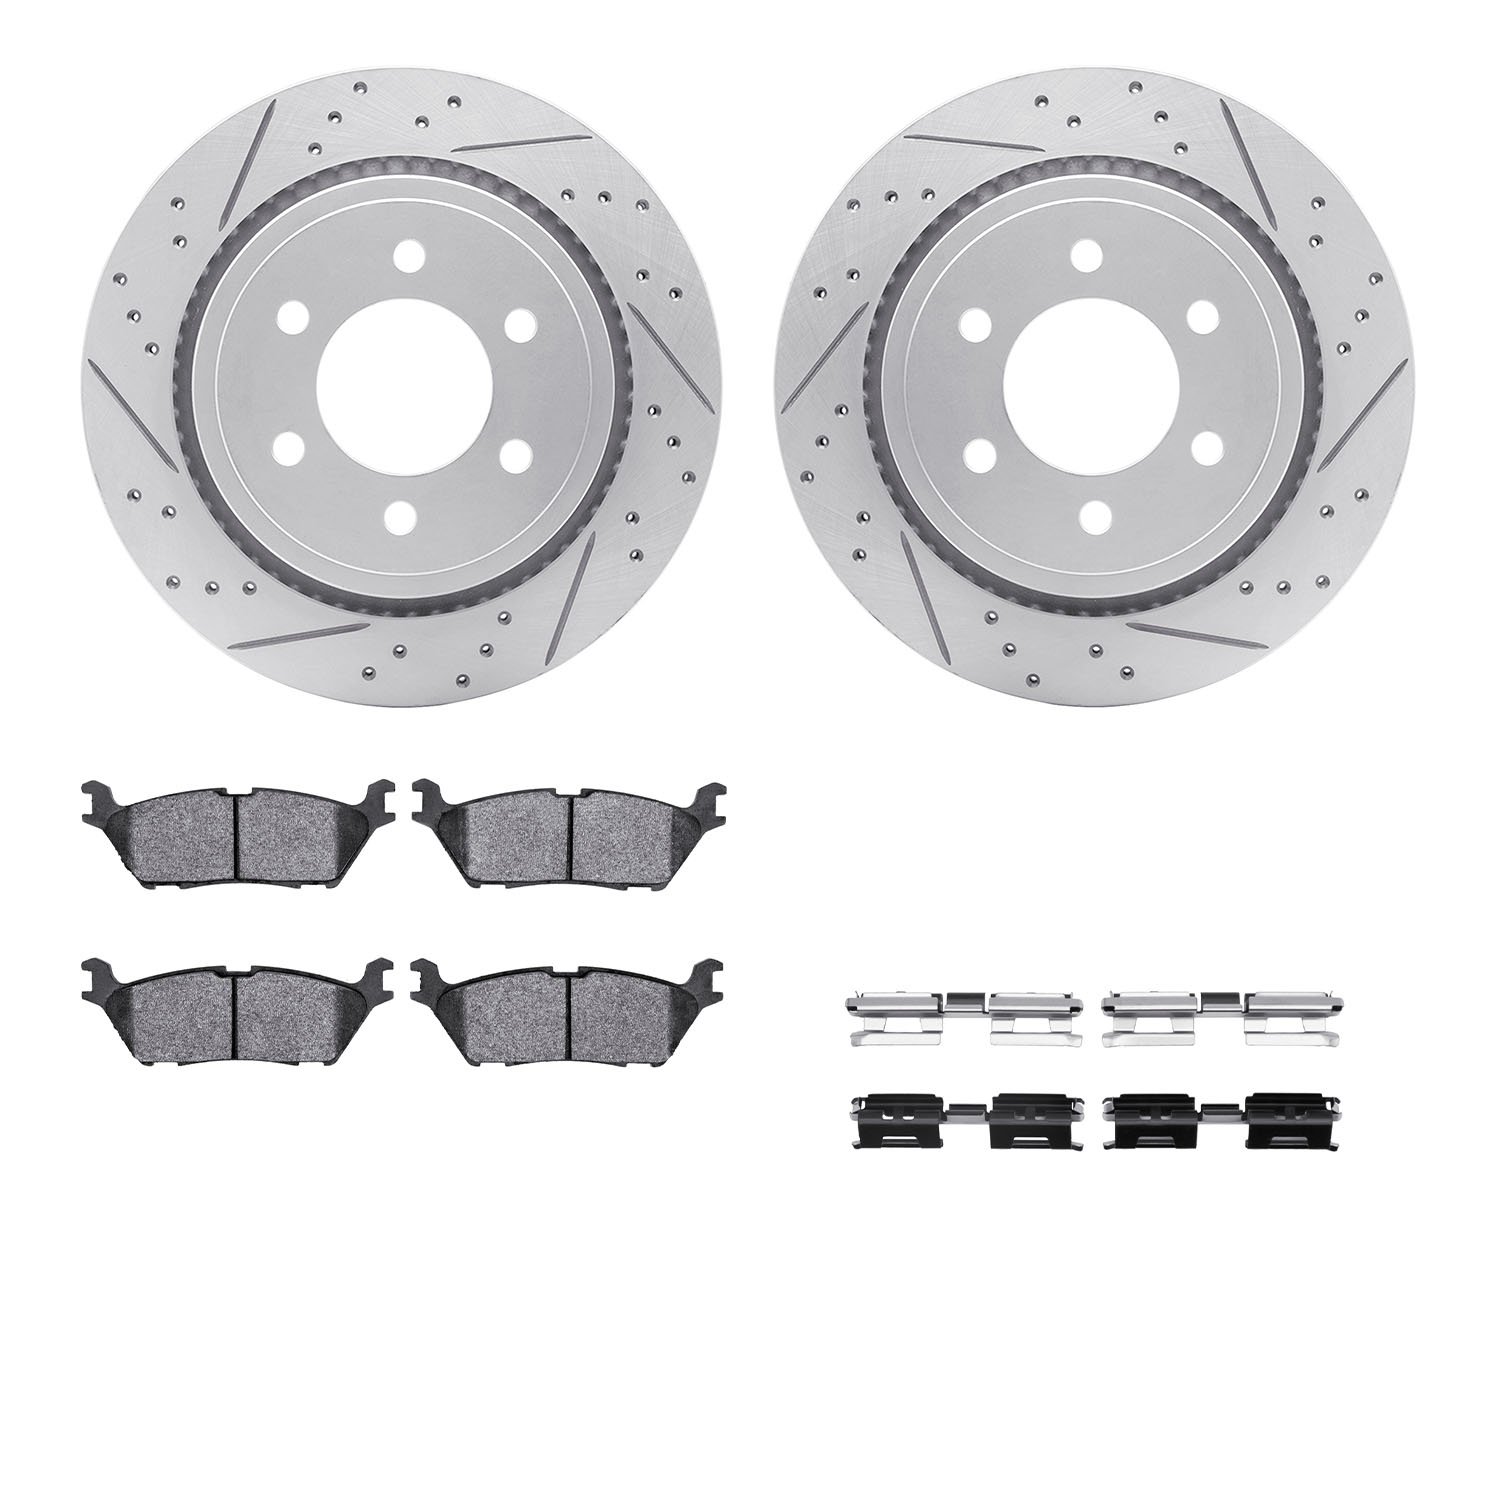 2212-99196 Geoperformance Drilled/Slotted Rotors w/Heavy-Duty Pads Kit & Hardware, 2015-2017 Ford/Lincoln/Mercury/Mazda, Positio